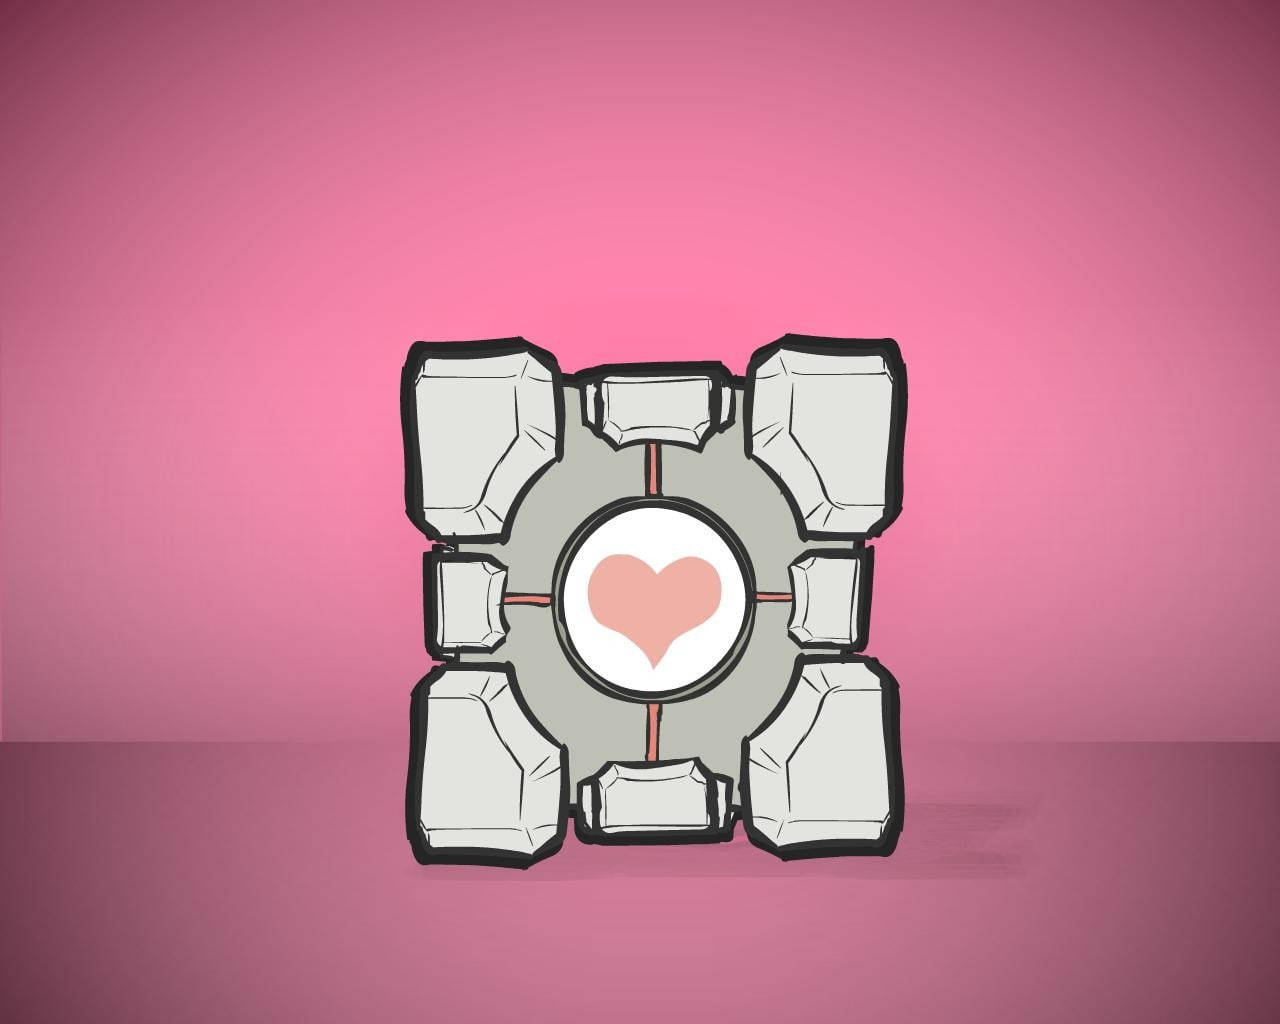 videogametatts  on Instagram Lovely Companion Cube tattoo by  claudiocamilucci portaltattoo portal companionc  Gaming tattoo  Tattoos Video game tattoo